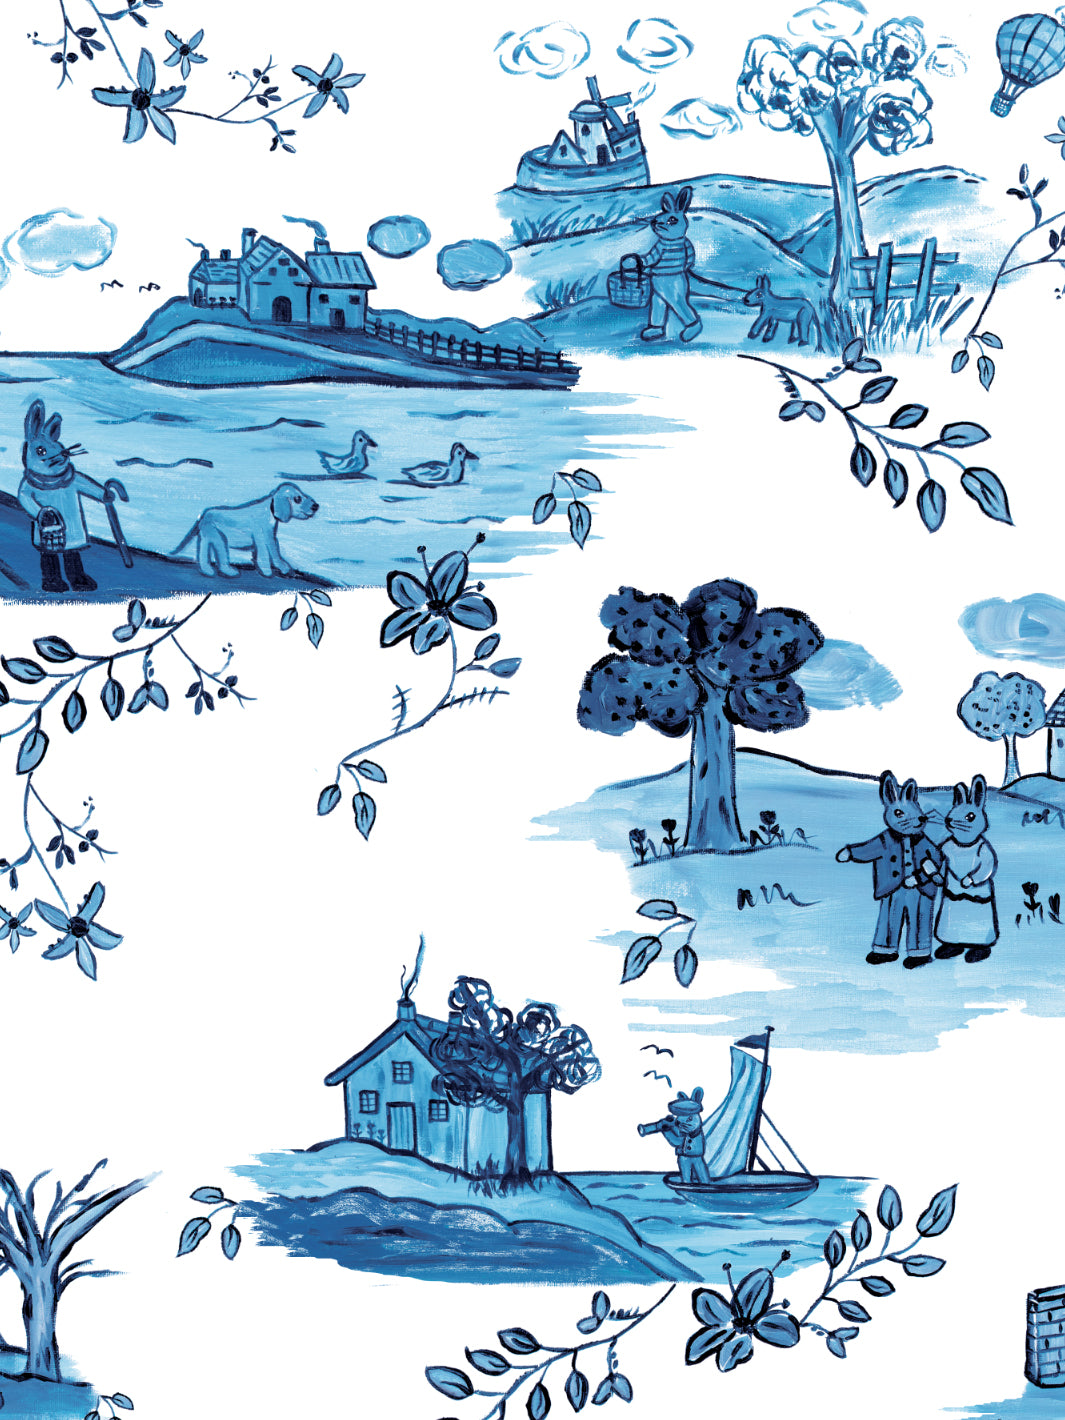 'Bunny Toile' Wallpaper by Carly Beck - Blue